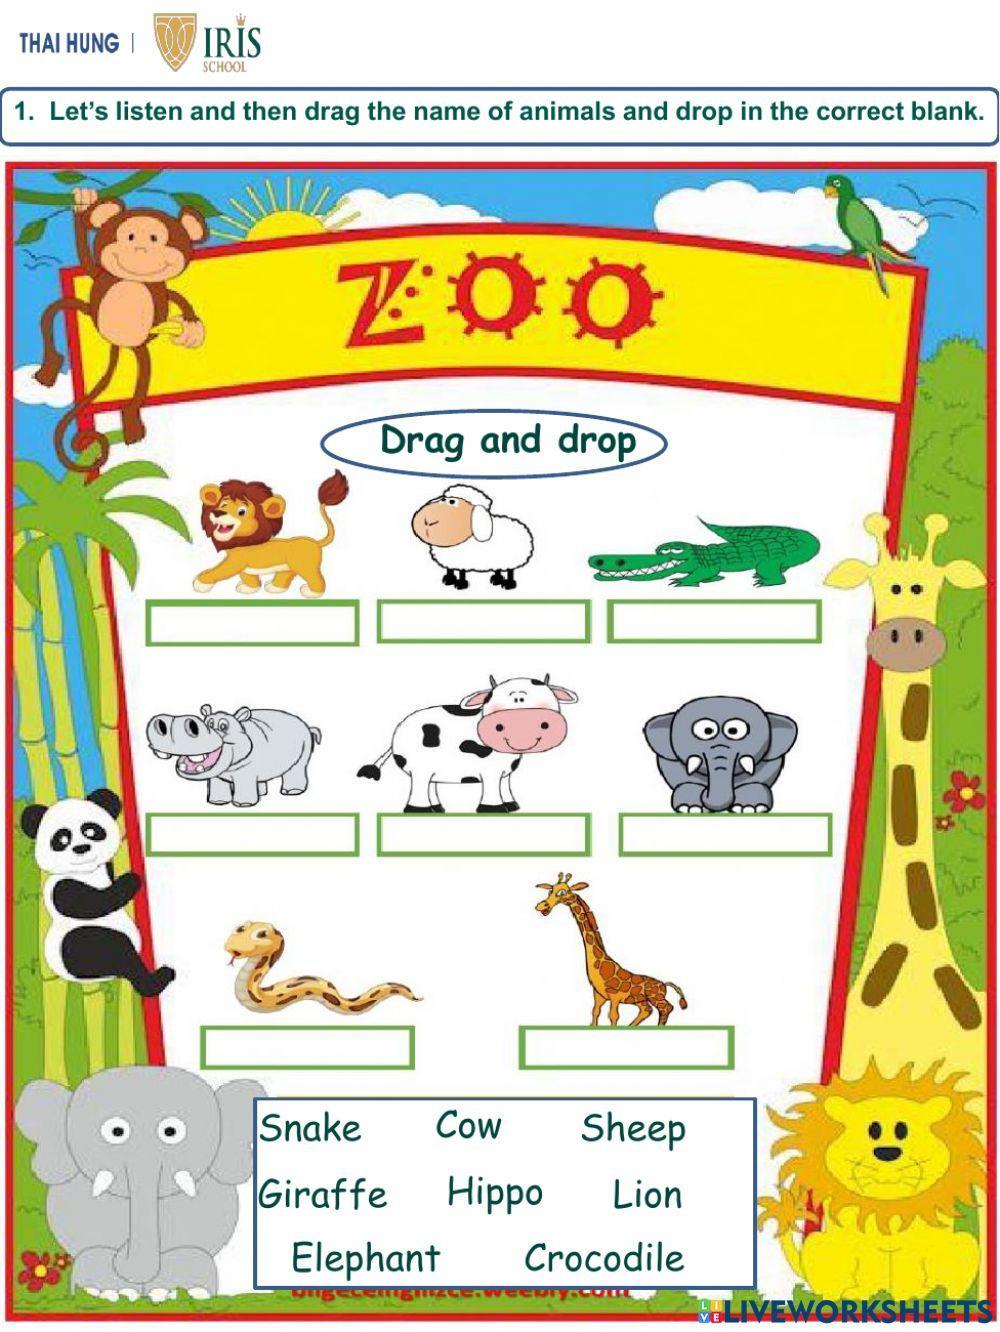 Worksheet about Animals for Kids